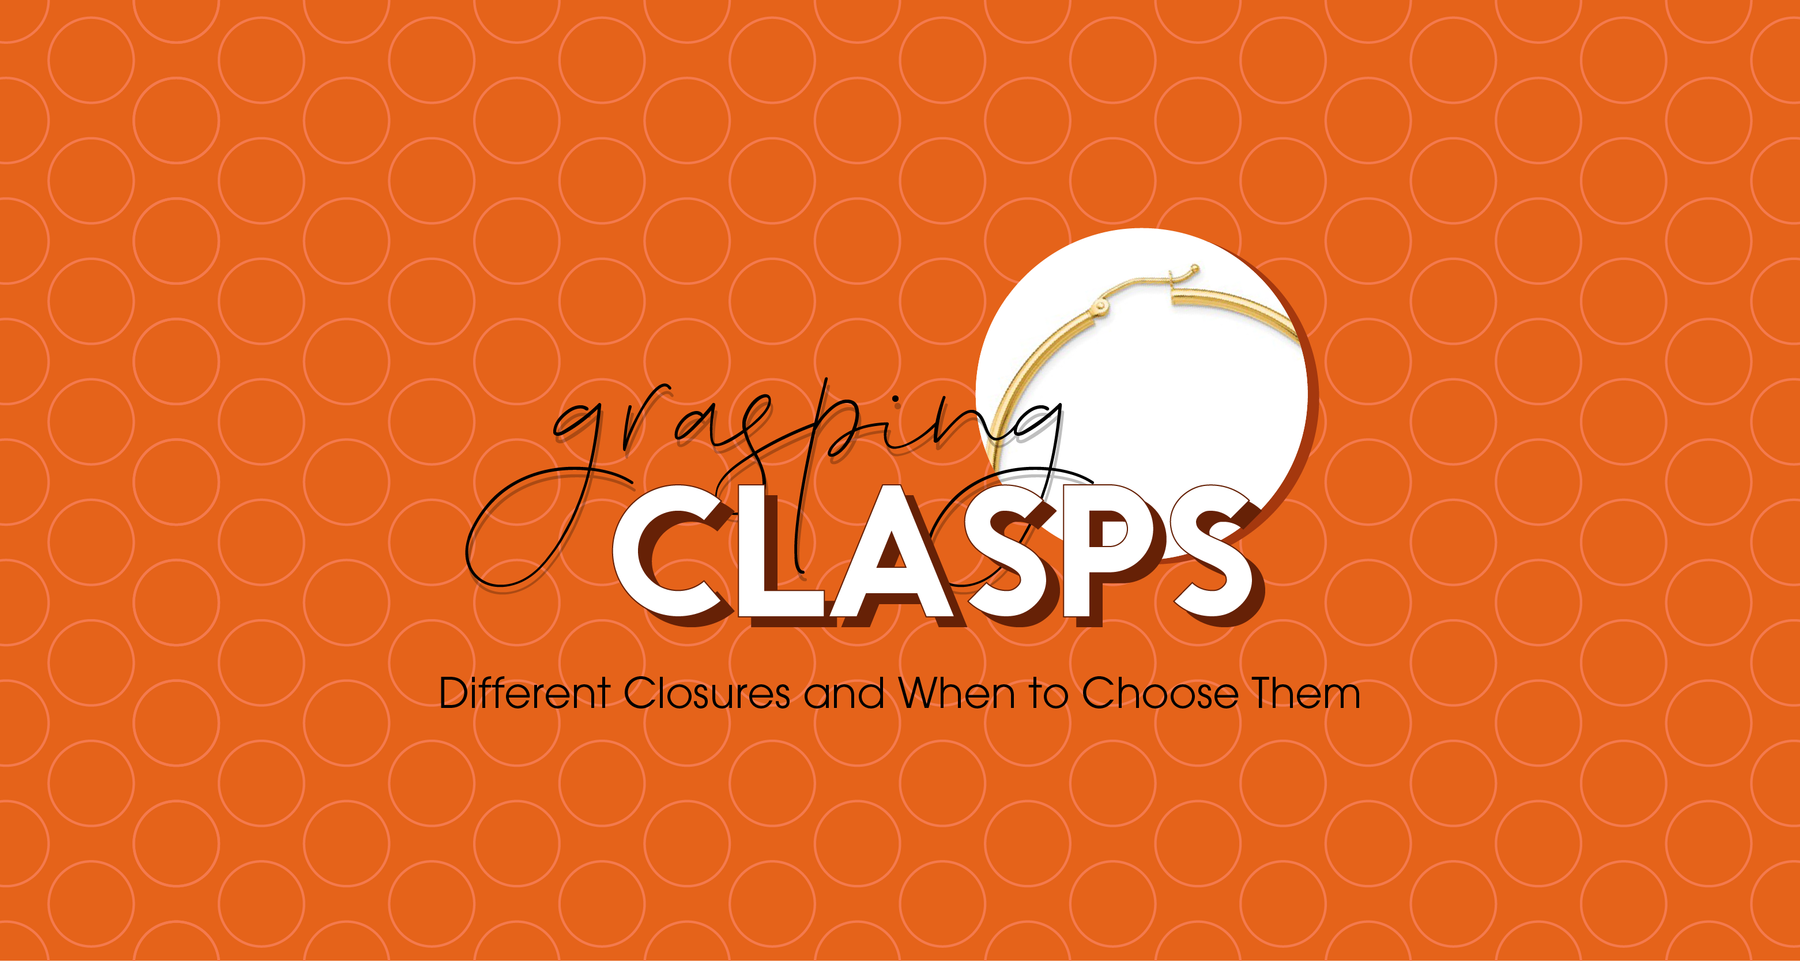 Grasping Clasps